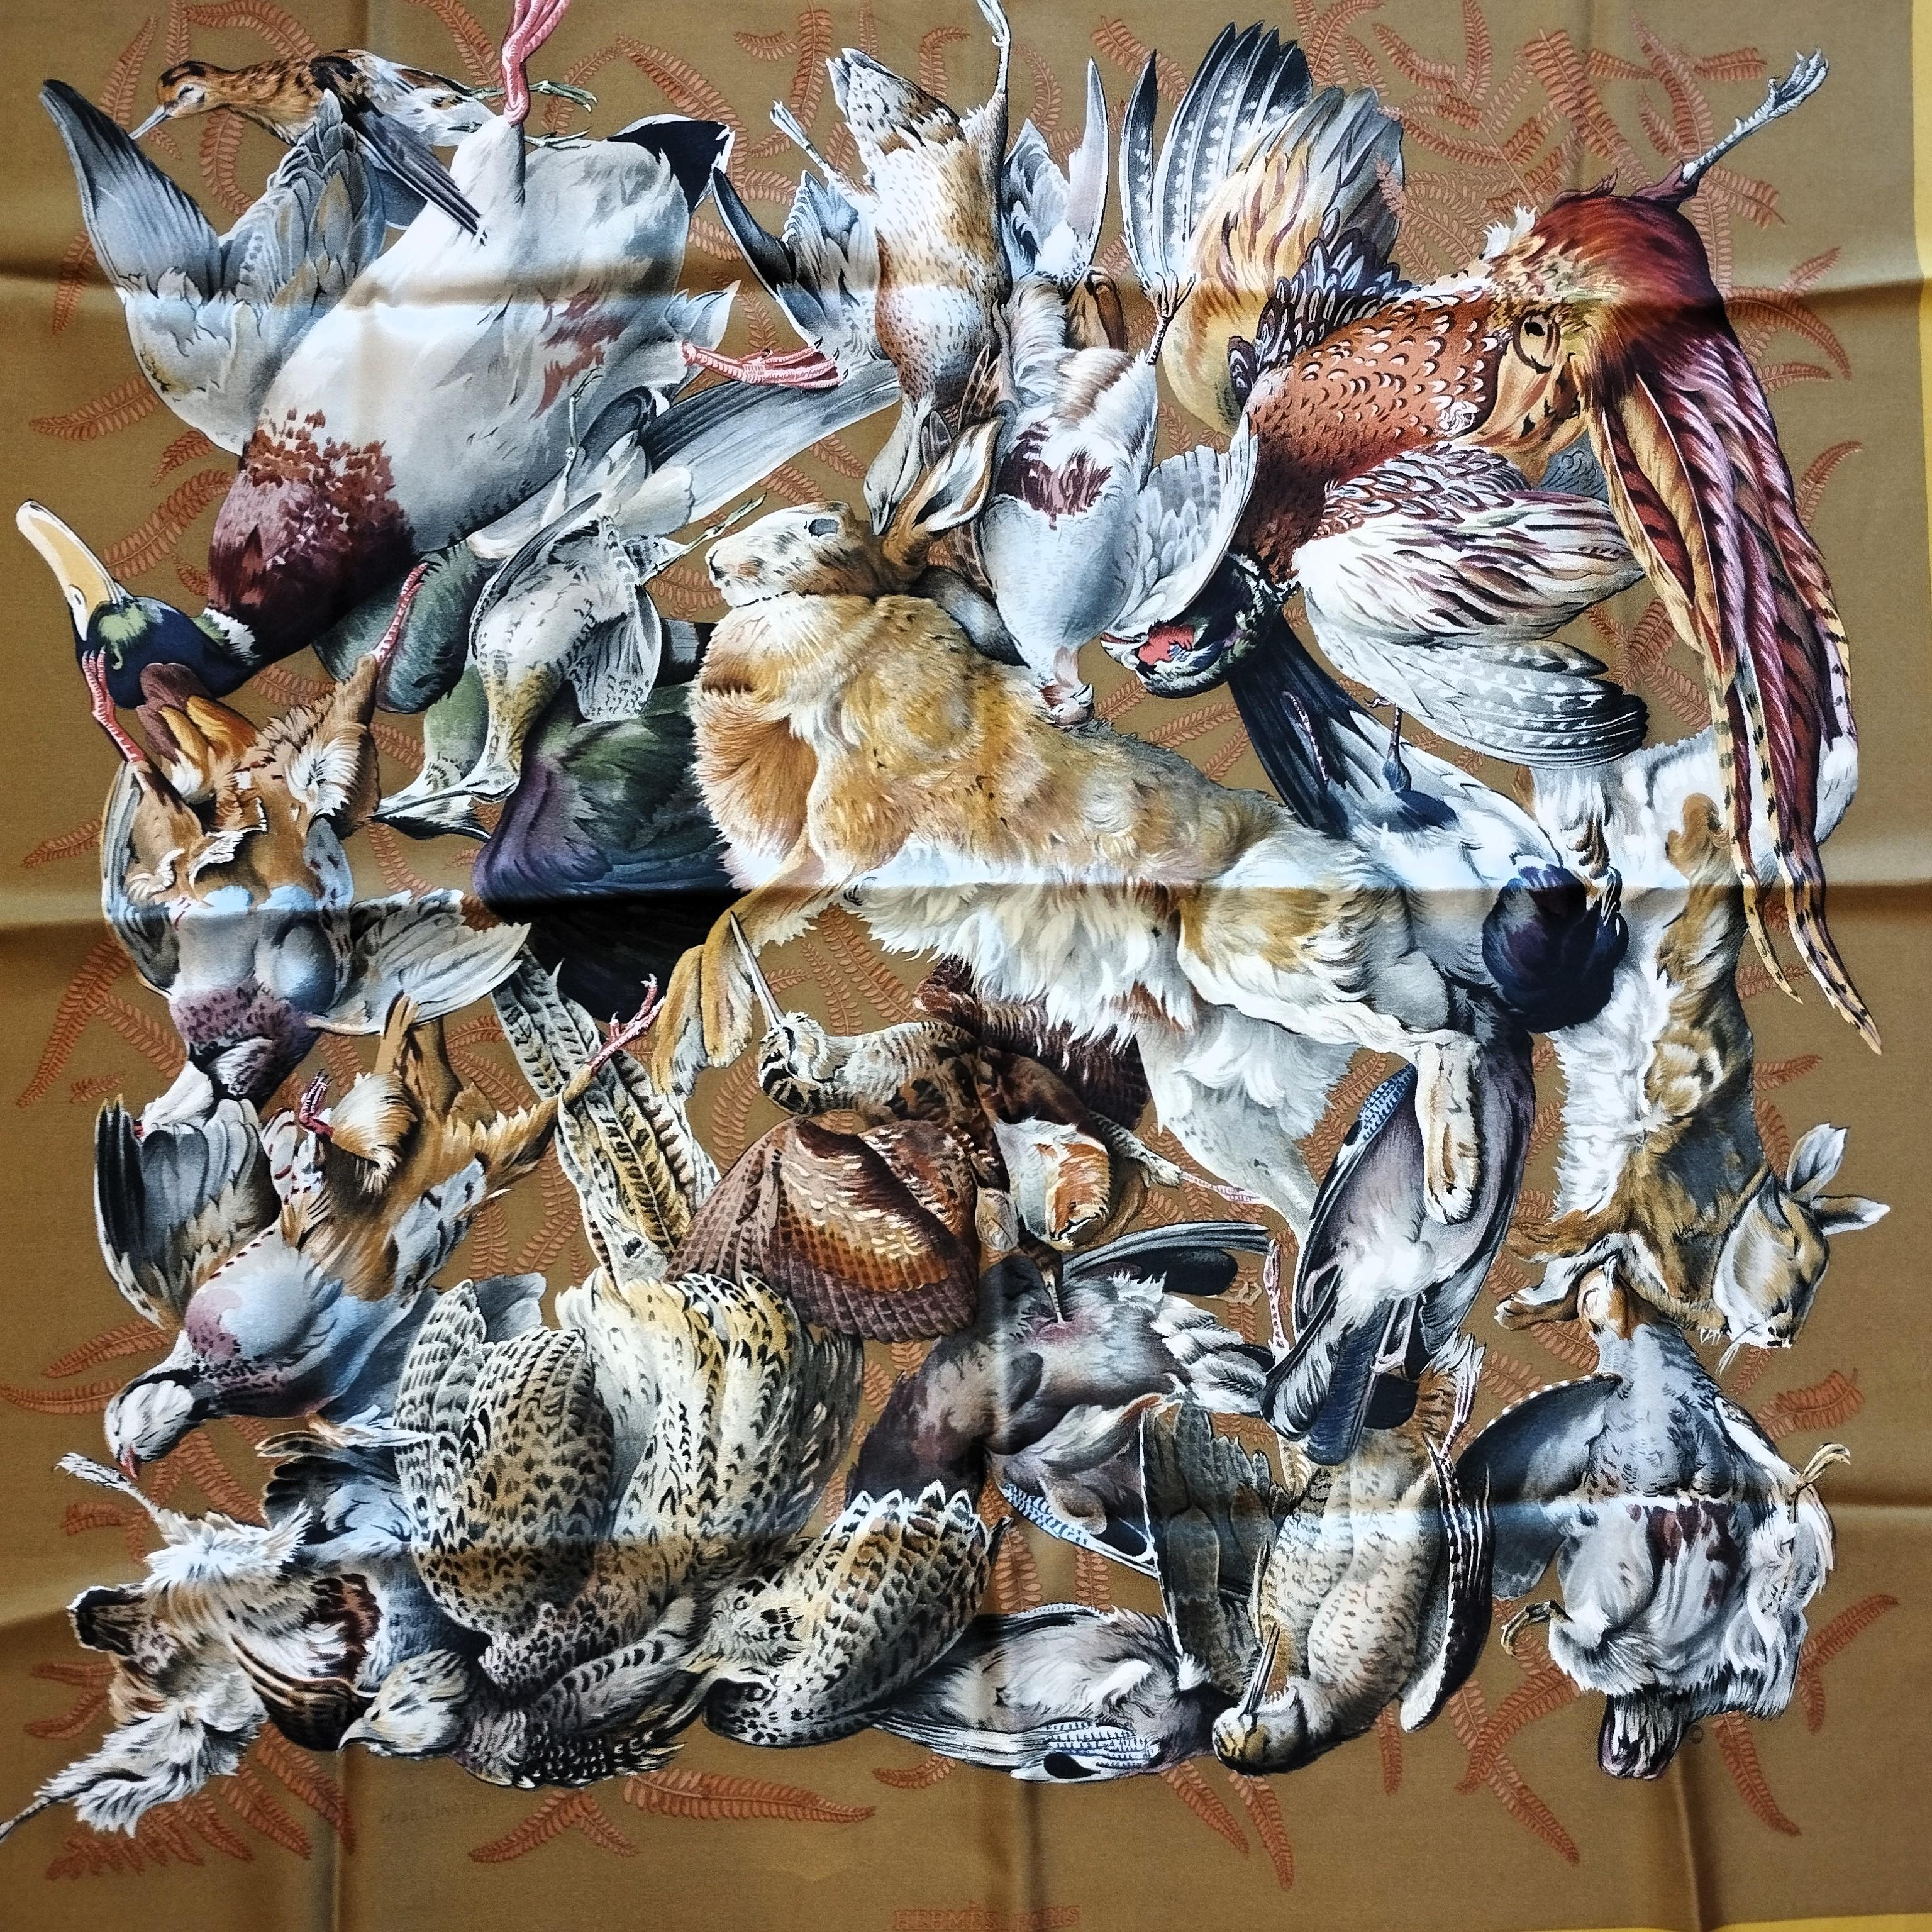 Beautiful and rare scarf from Hermès
100% Silk
Designer : Henri de Linares
Original design of 1962
Hunting game print
Mustard colors
Cm 90 x 90  (35,4 x 35,4 inches)
Worldwide express shipping included in the price !